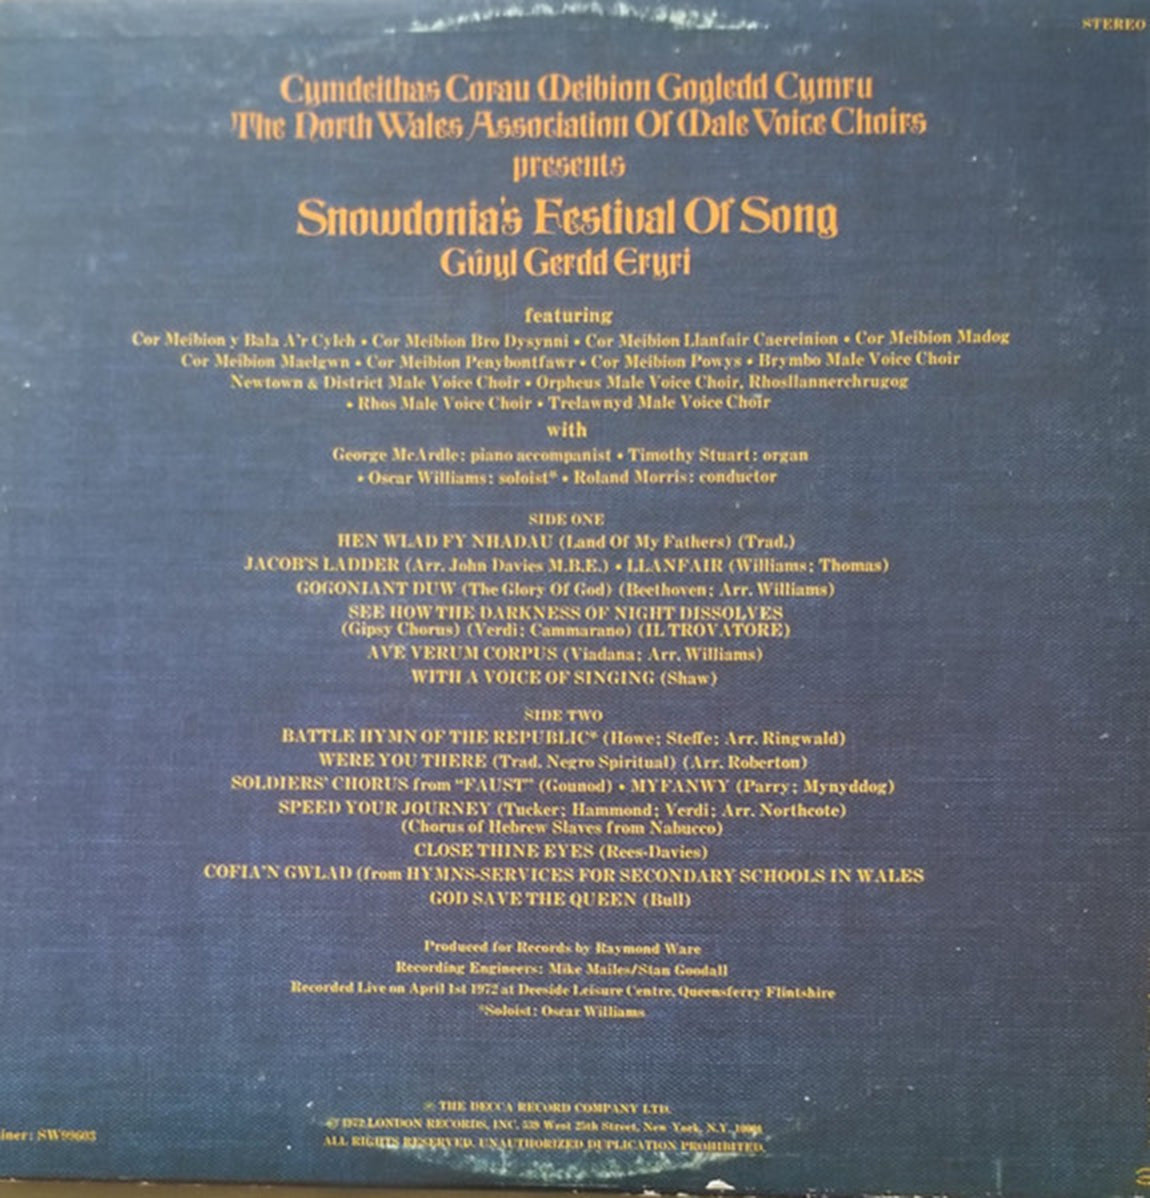 Snowdonia's Festival Of Song - Music of Wales - 1972 Rare